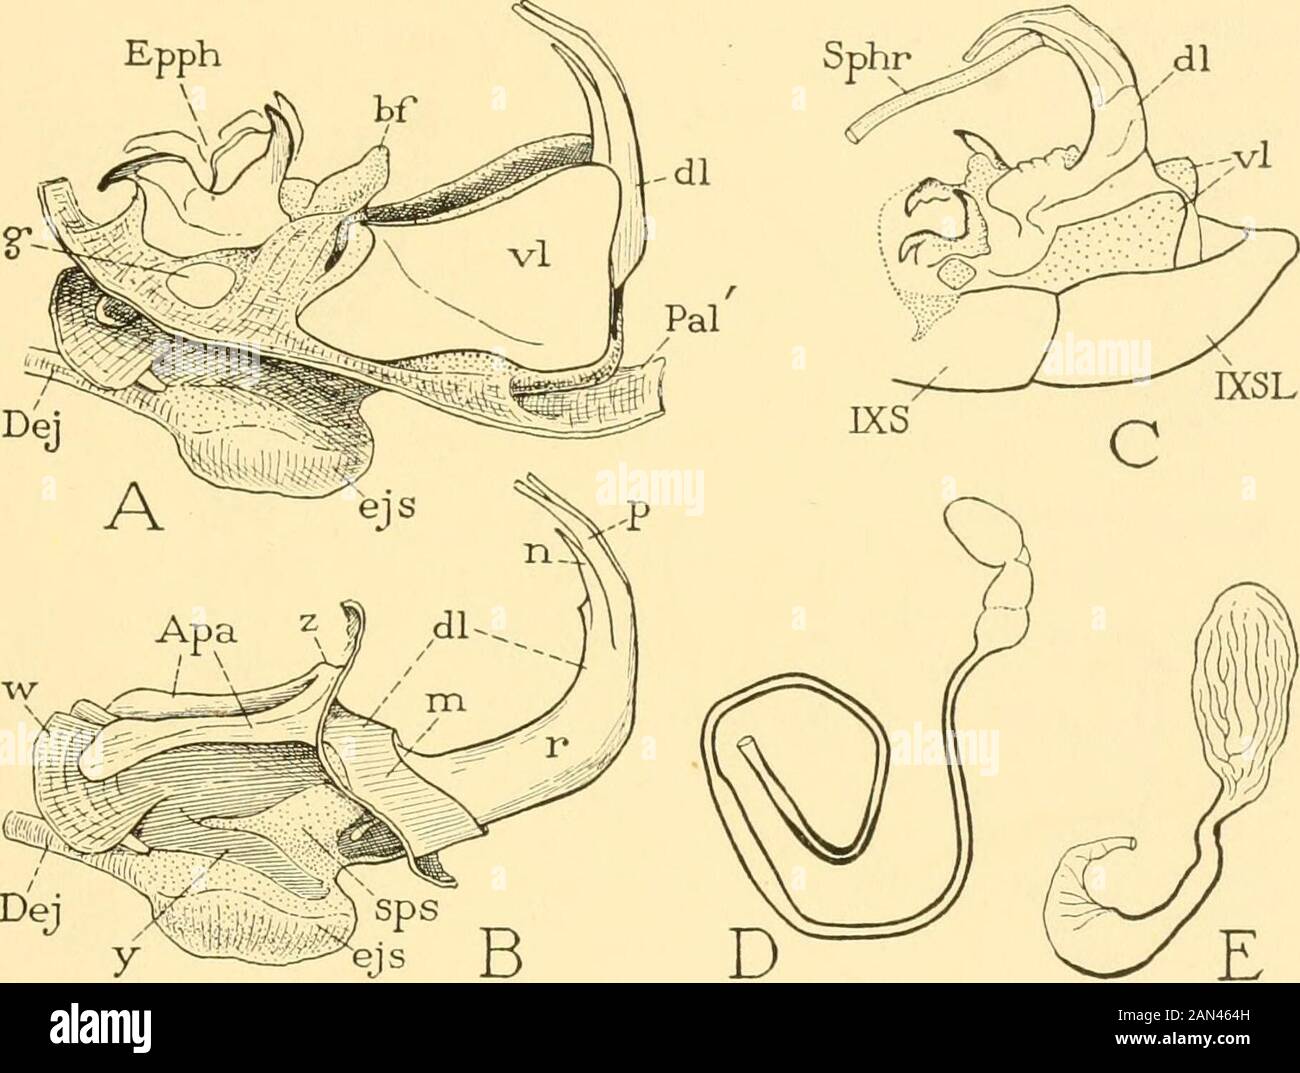 Smithsonian miscellaneous collections . allic bulb. B, epiphallus, dorsal view, and associated retractor muscles.C, dorsal lobe of aedeagus and lateral apodeme, left side. D, endophallus andapical processes of aedeagus. parts. The epiphallus is large and strongly developed (fig. 31 A,Epph, B). The basal fold (A, hf) covers the base of the aedeagusin the usual manner. The dorsal lobe of the aedeagus consists of asmall proximal part (C, ni) bearing two strong apodemal arms(Apa), and of four long curved apical processes (11, p). The ventral NO. 6 GRASSHOPPER ABDOMEN—SNODGRASS 17 lobe (A, vl) is u Stock Photo